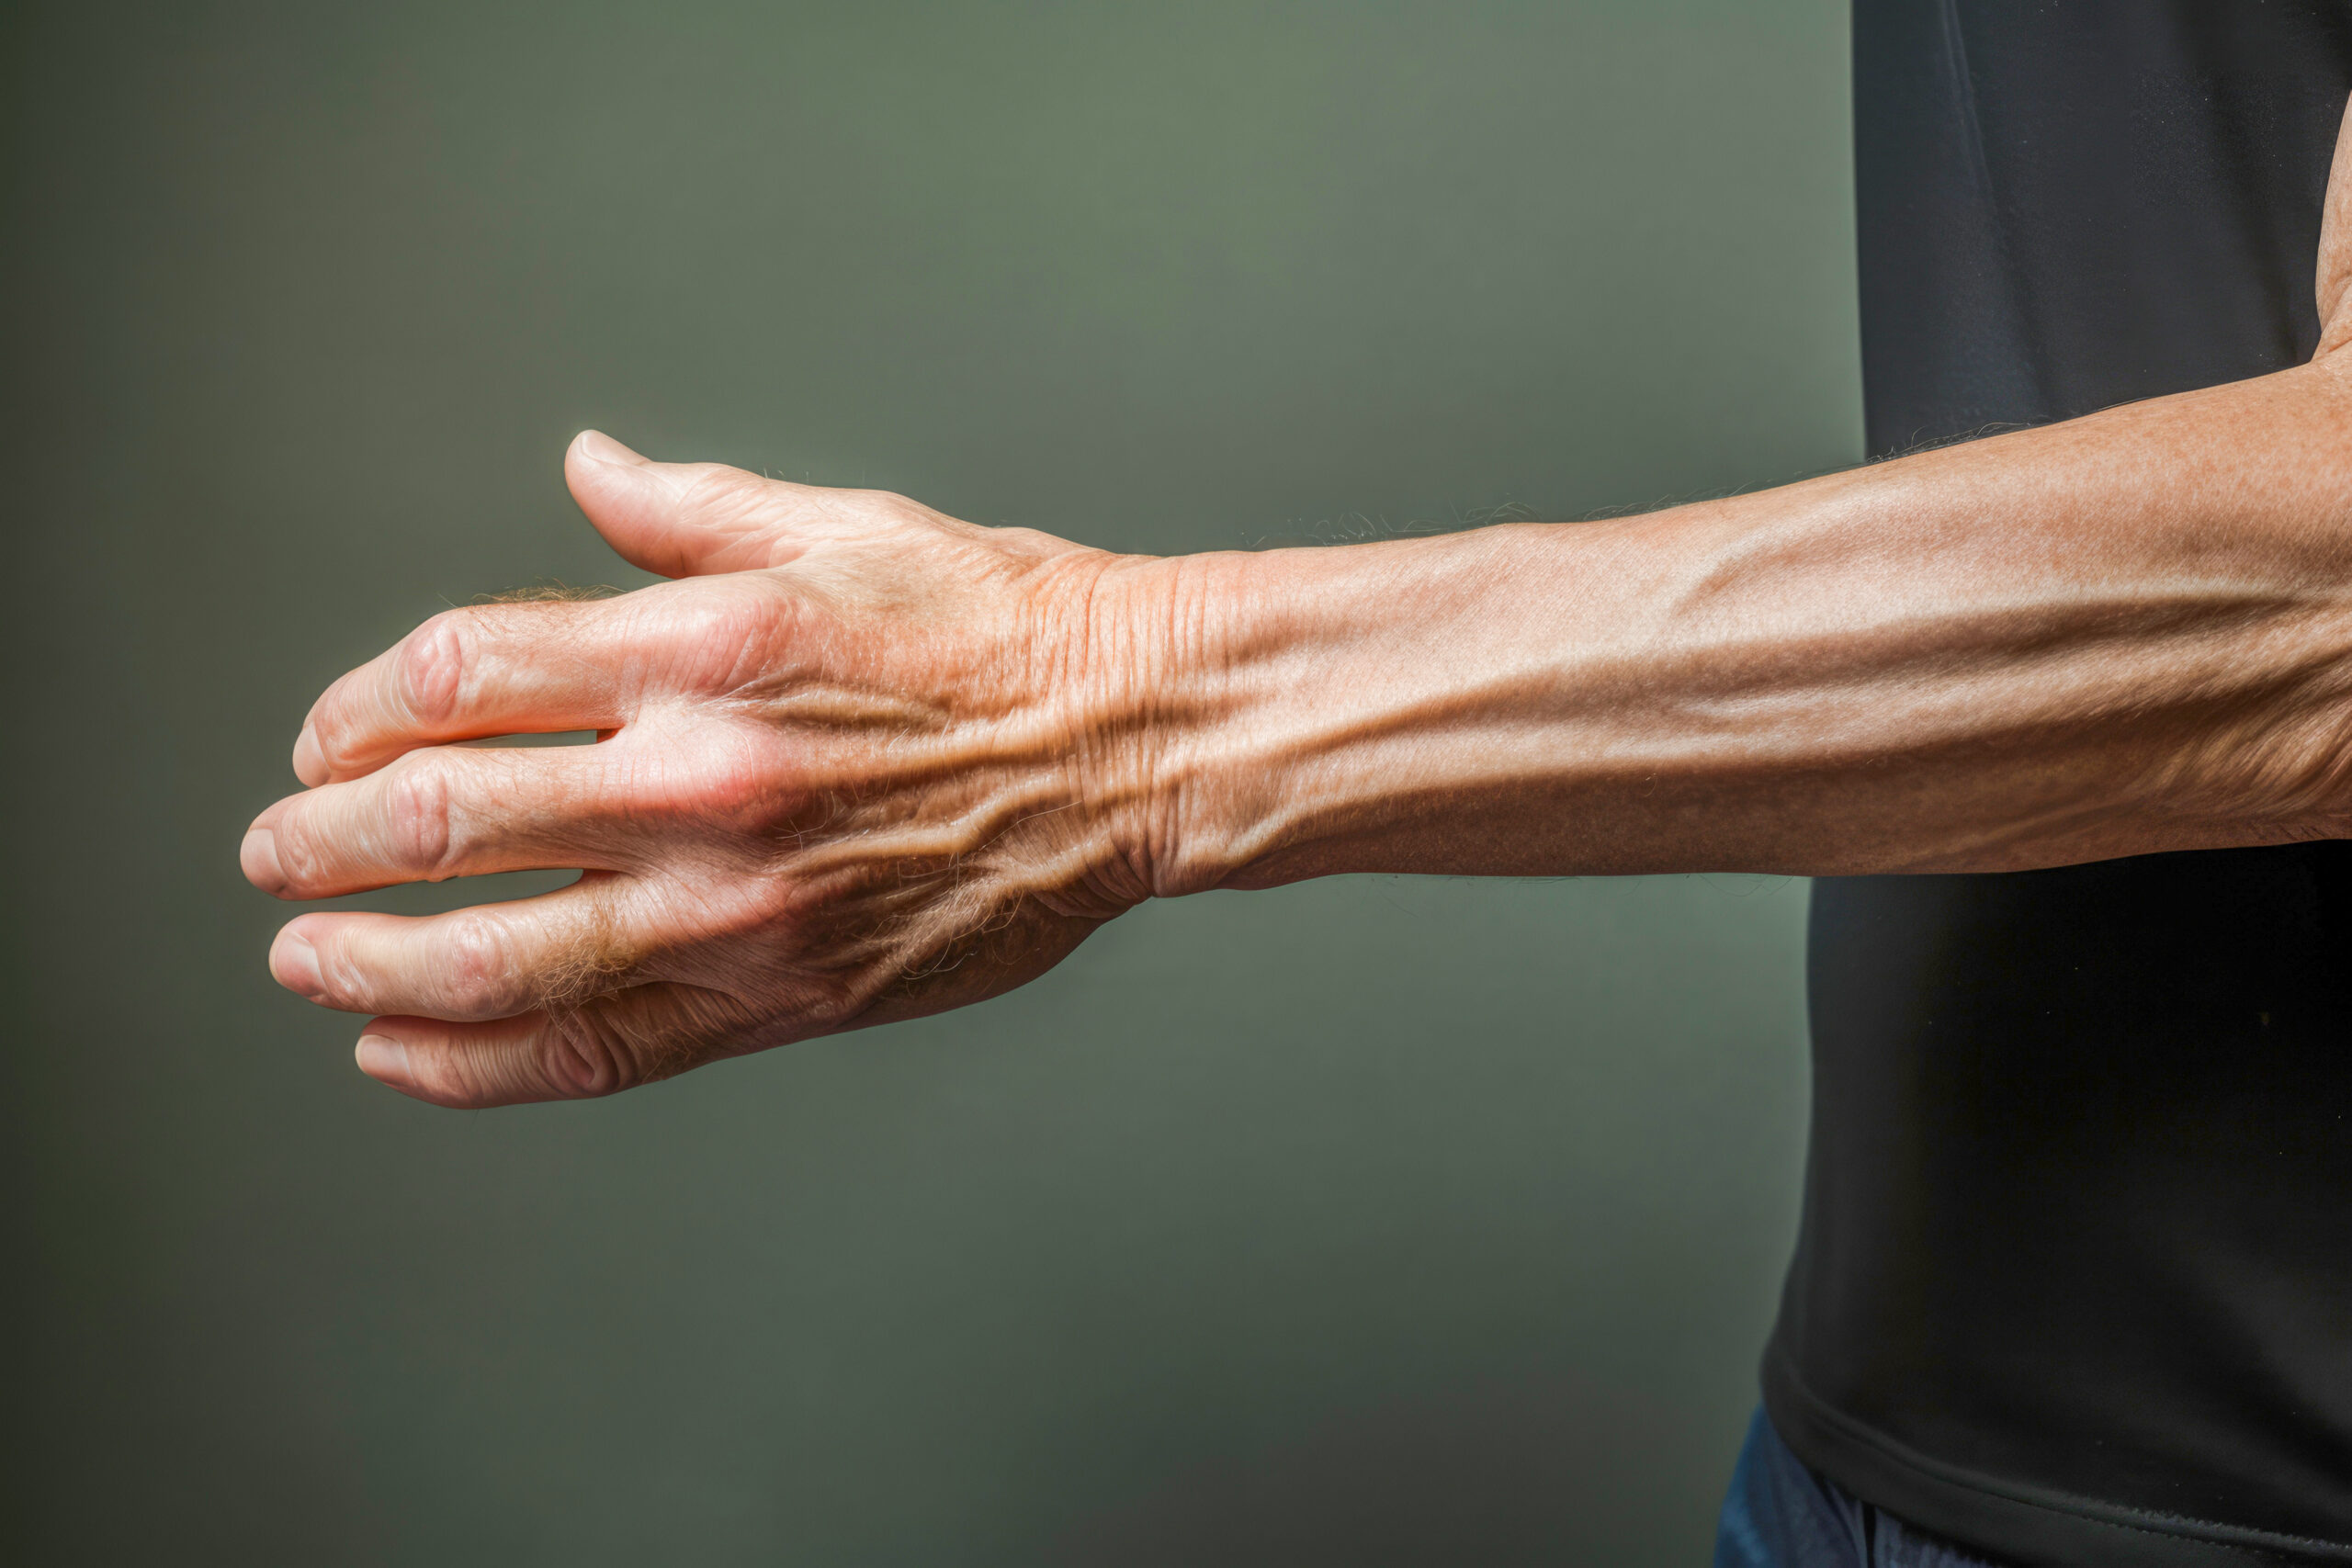 Managing Rheumatism: Inflamed joints and wrinkled hands in seniors require specialized care. Fingers tell a story of resilience and the importance of proper care.